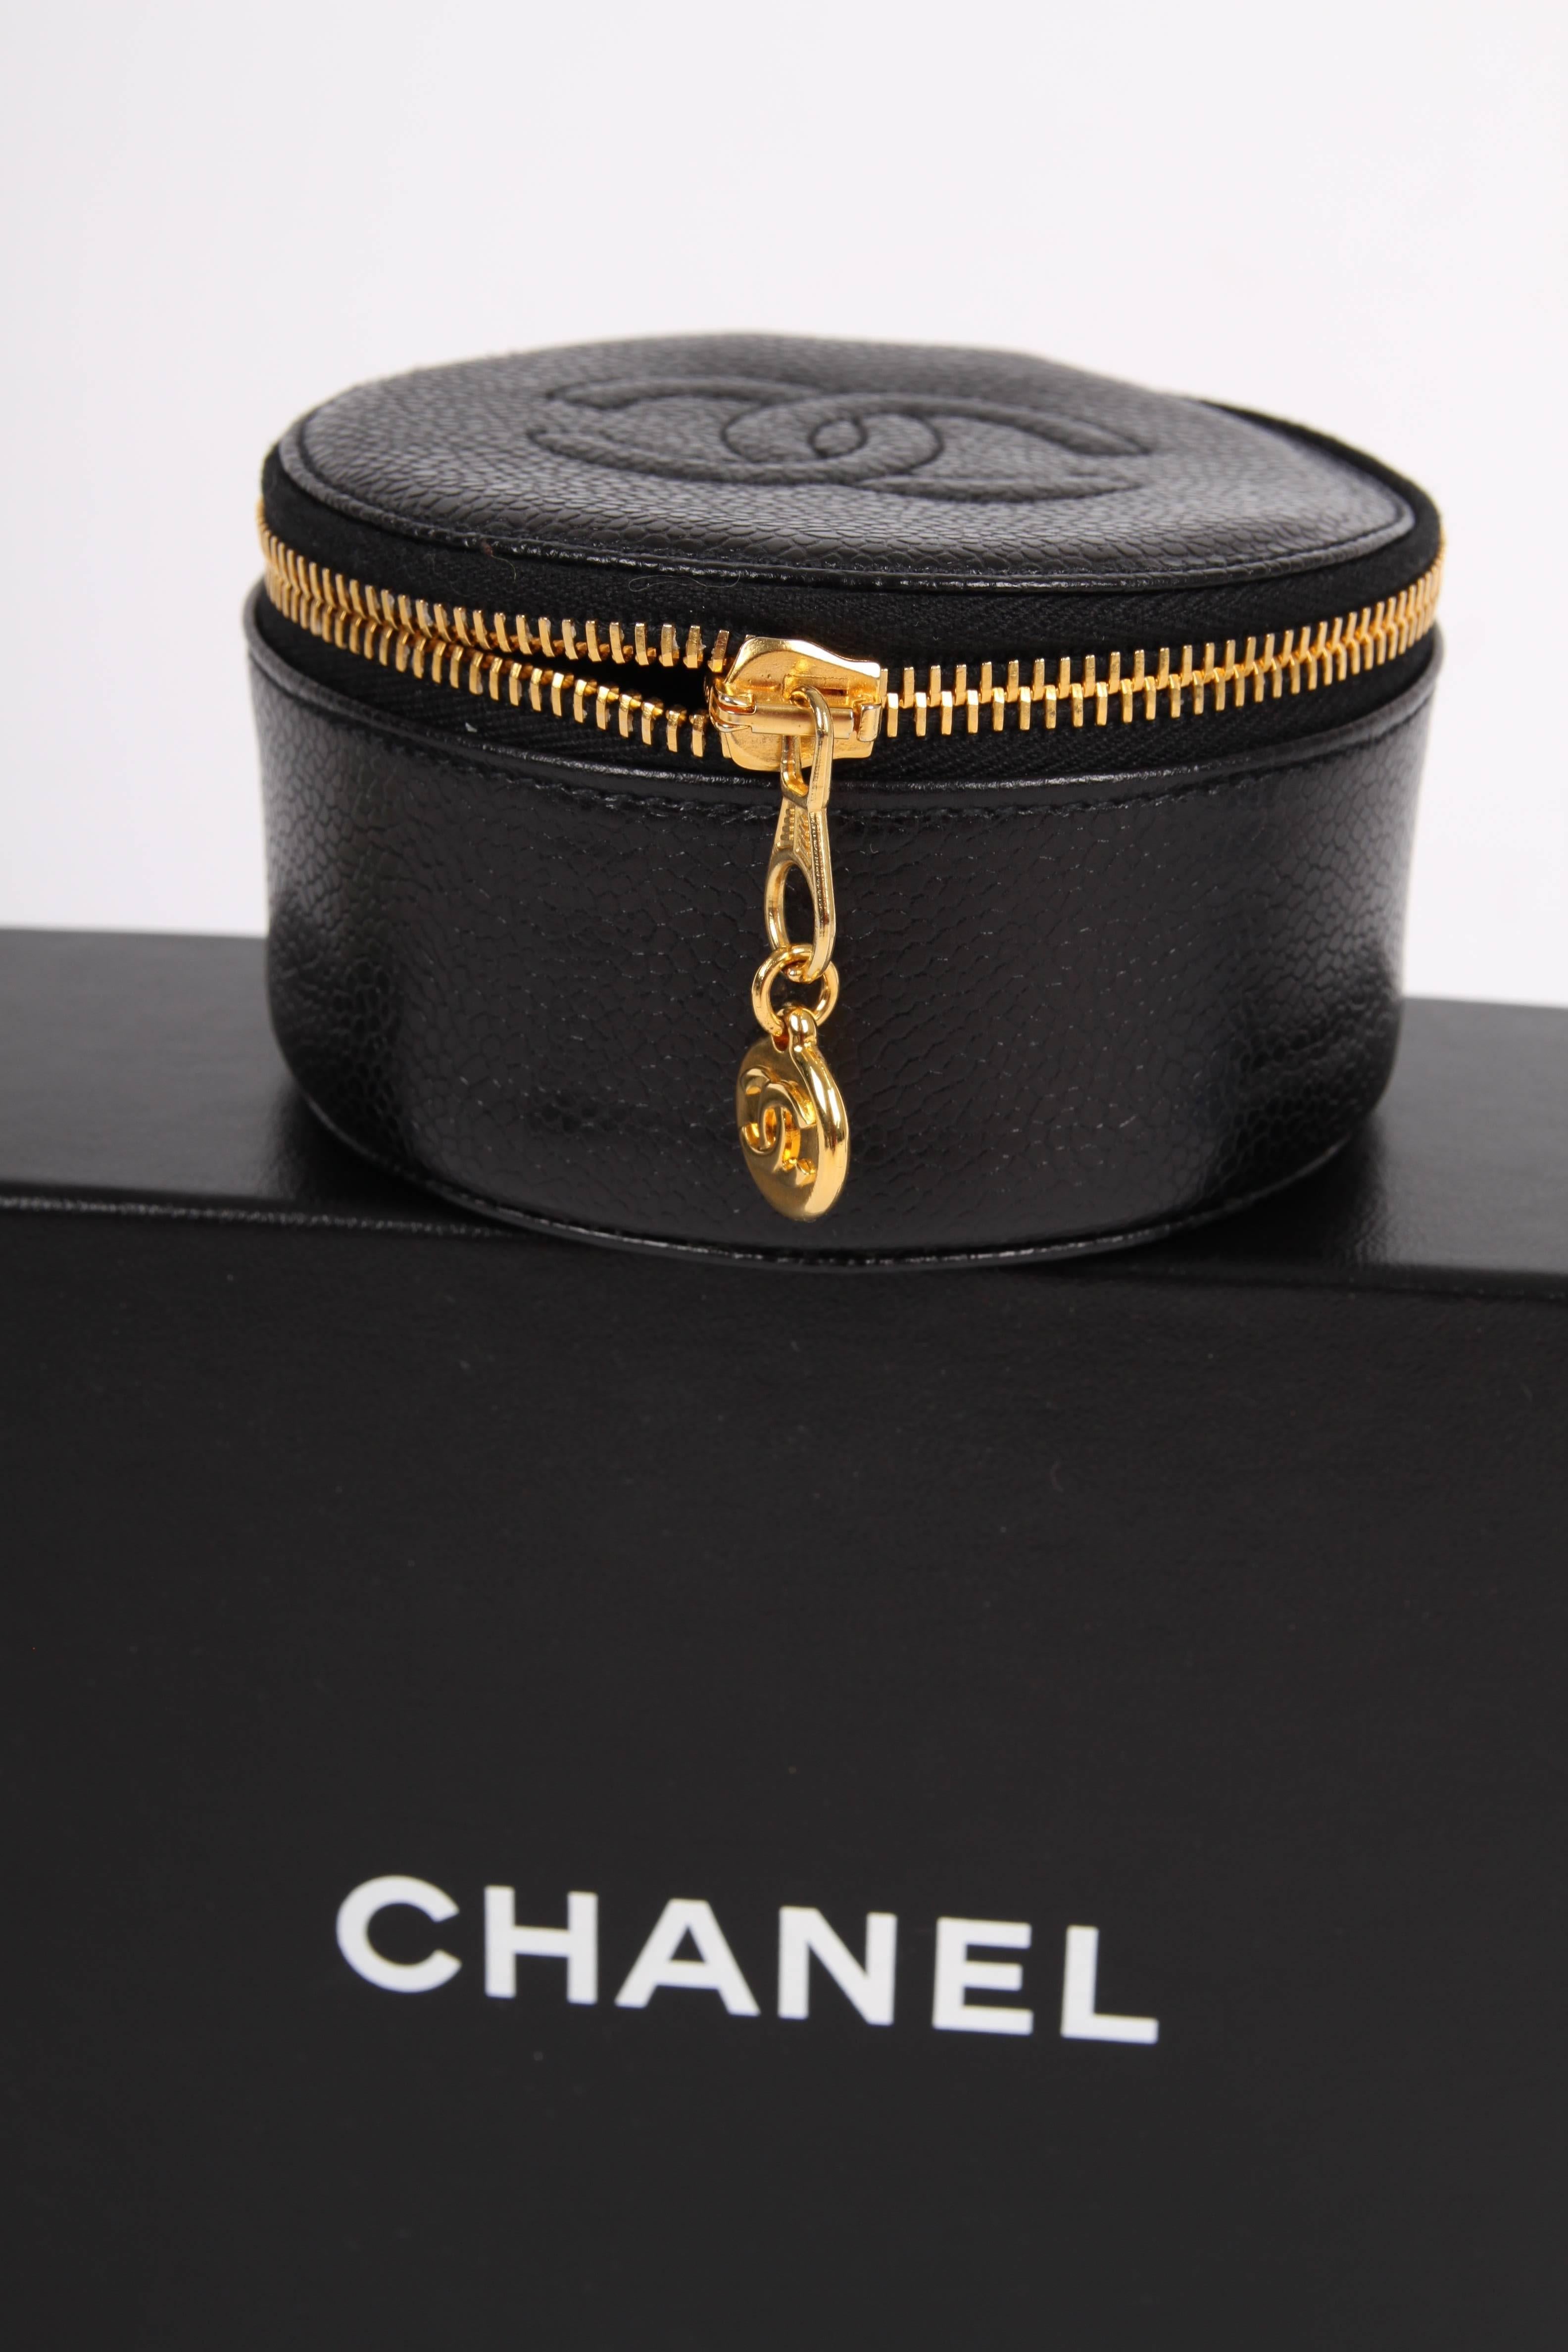 Women's or Men's Chanel CC Caviar Leather Jewelry Case / Round Pouch Bag - black 1991